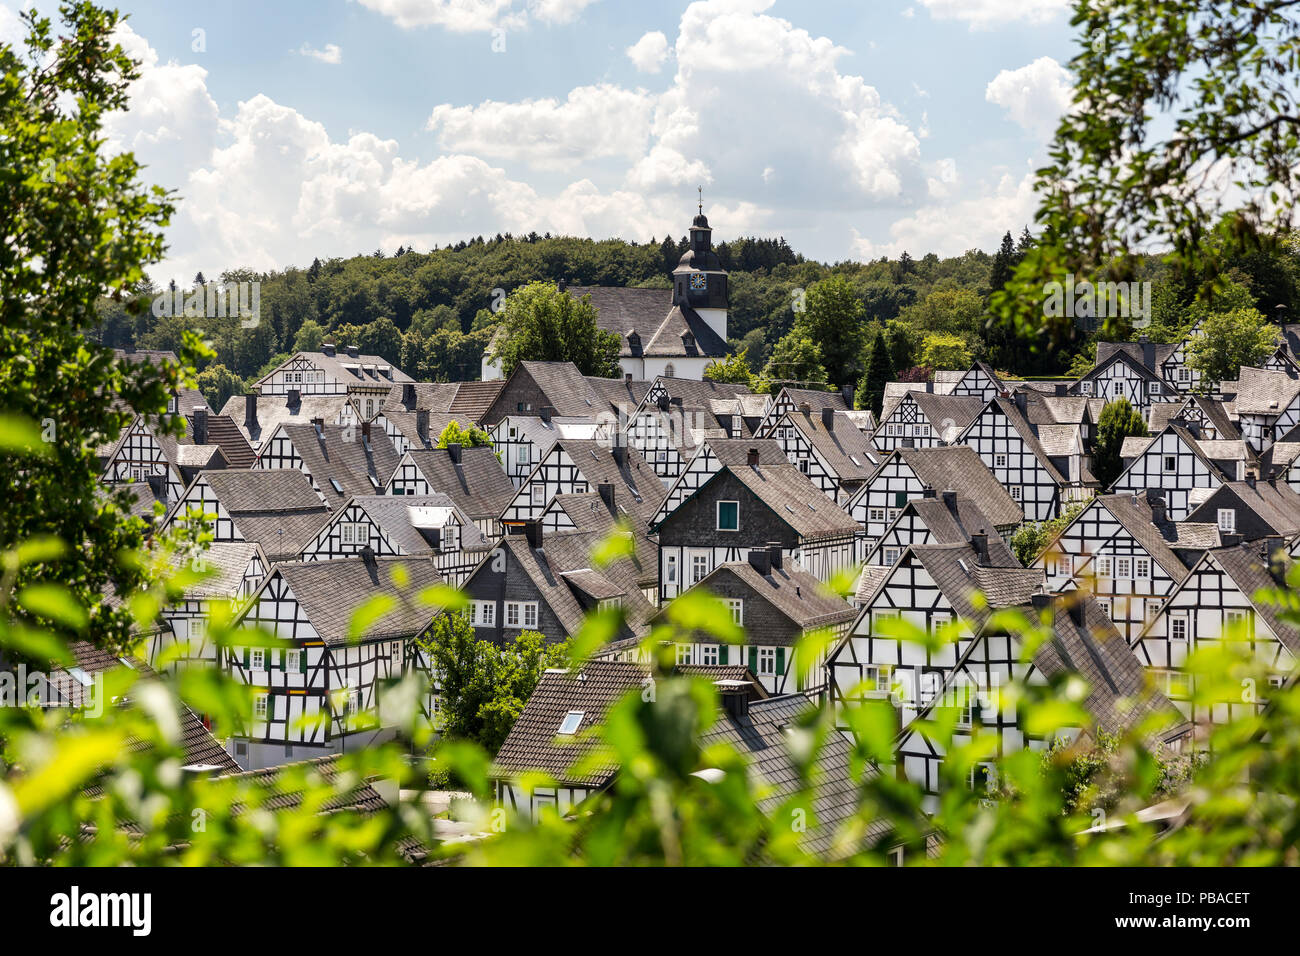 german timbered houses in freudenberg germany Stock Photo